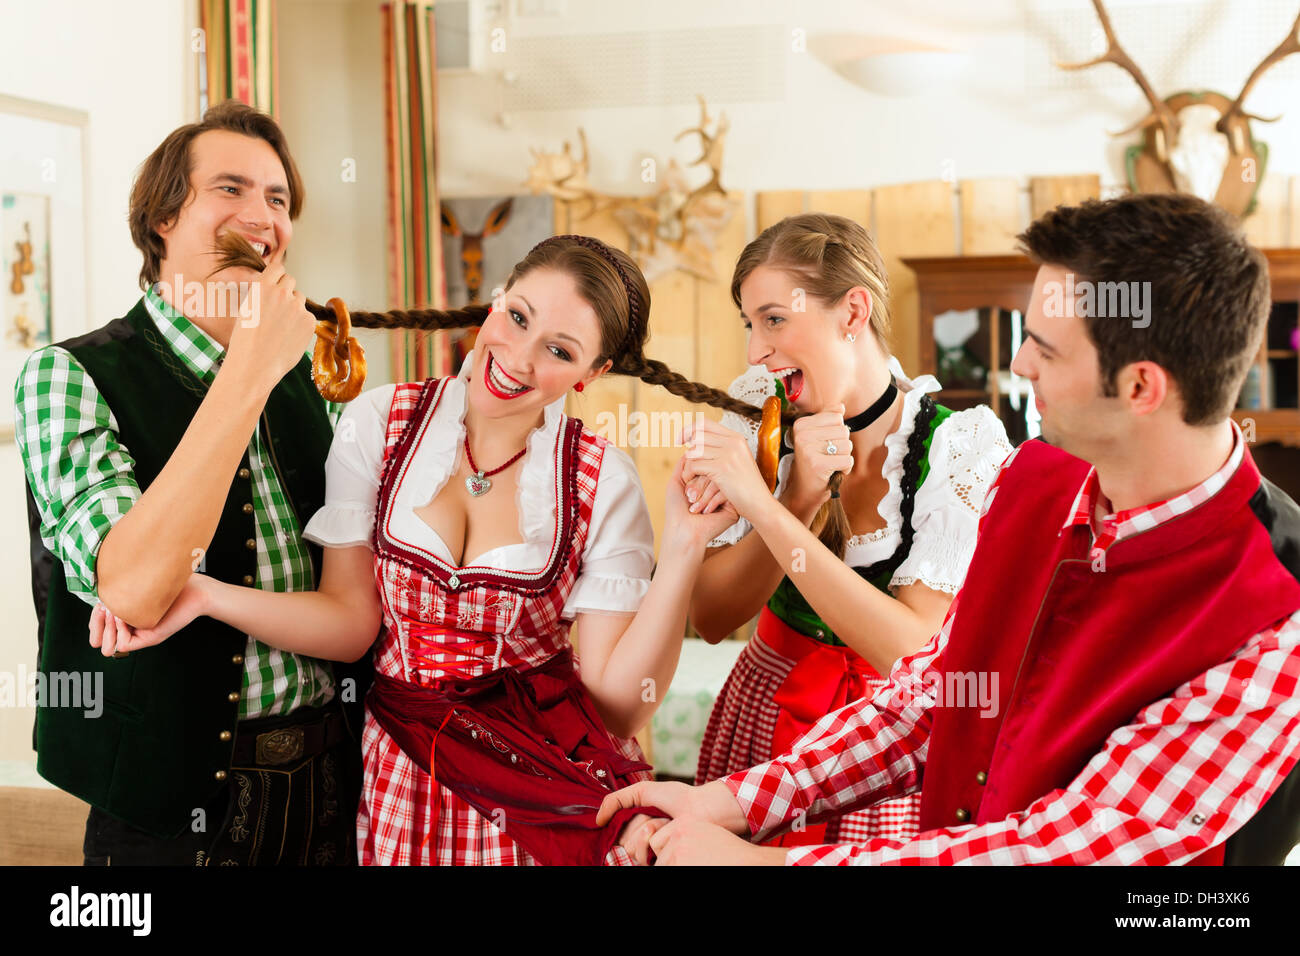 Young people in traditional Bavarian Tracht in restaurant or pub having fun and making jokes Stock Photo